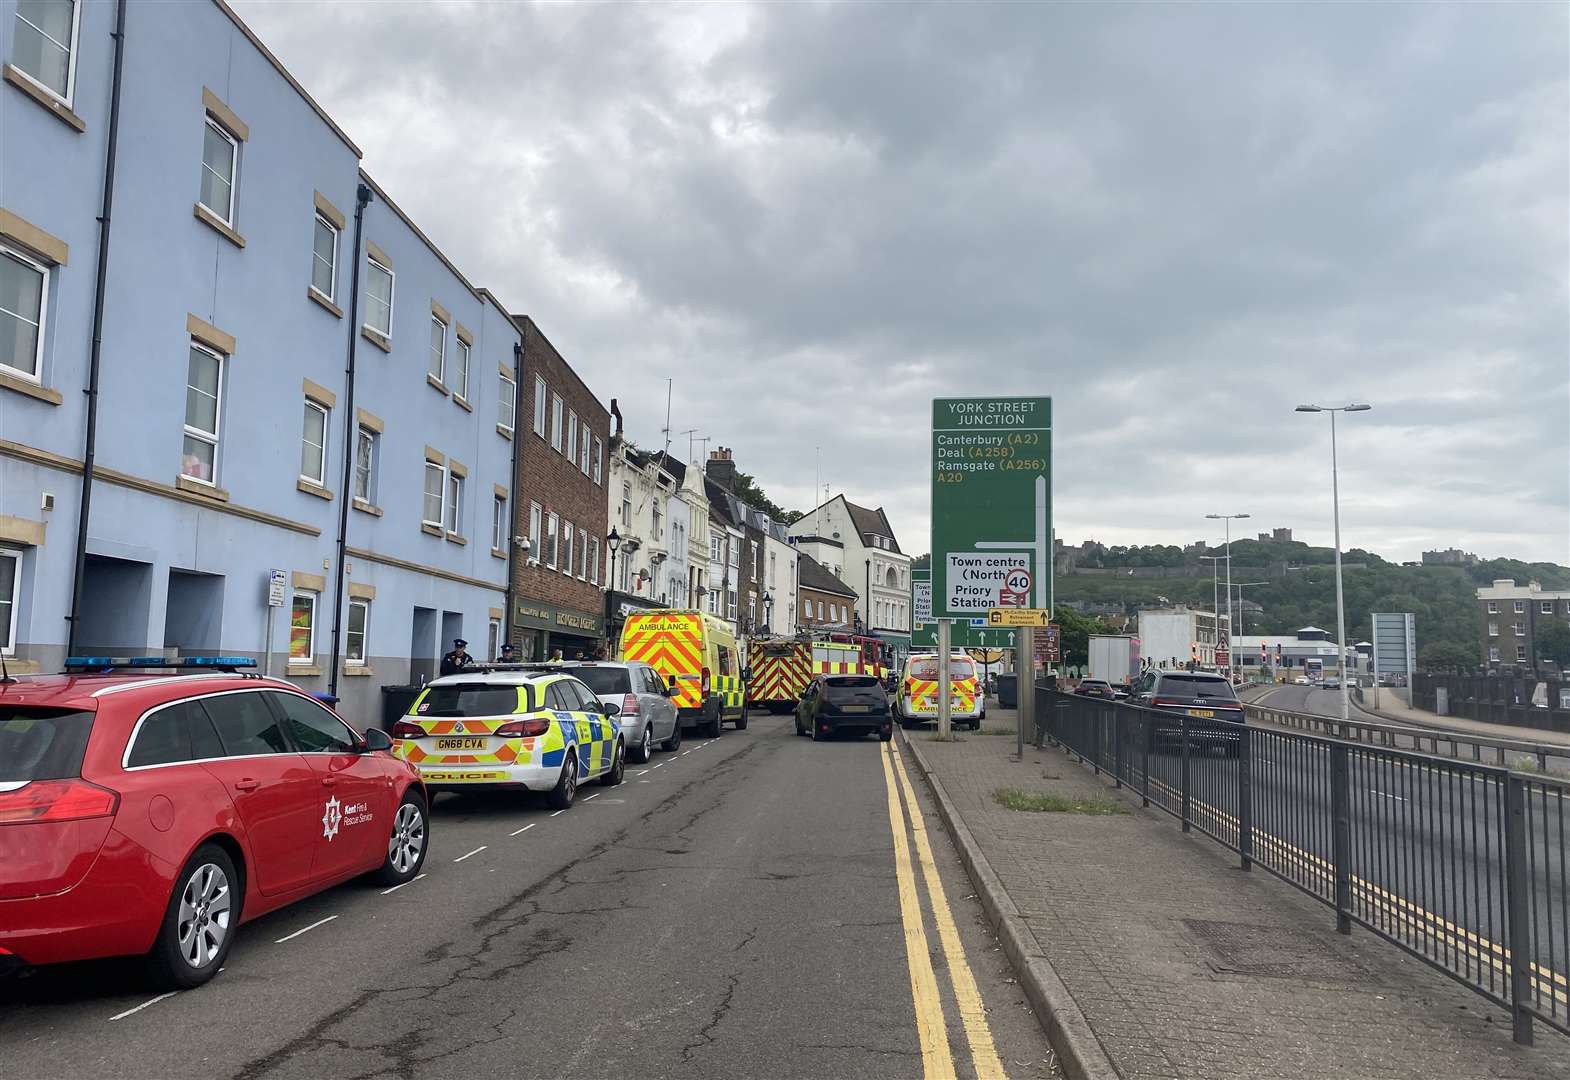 Emergency services called to incident near marina